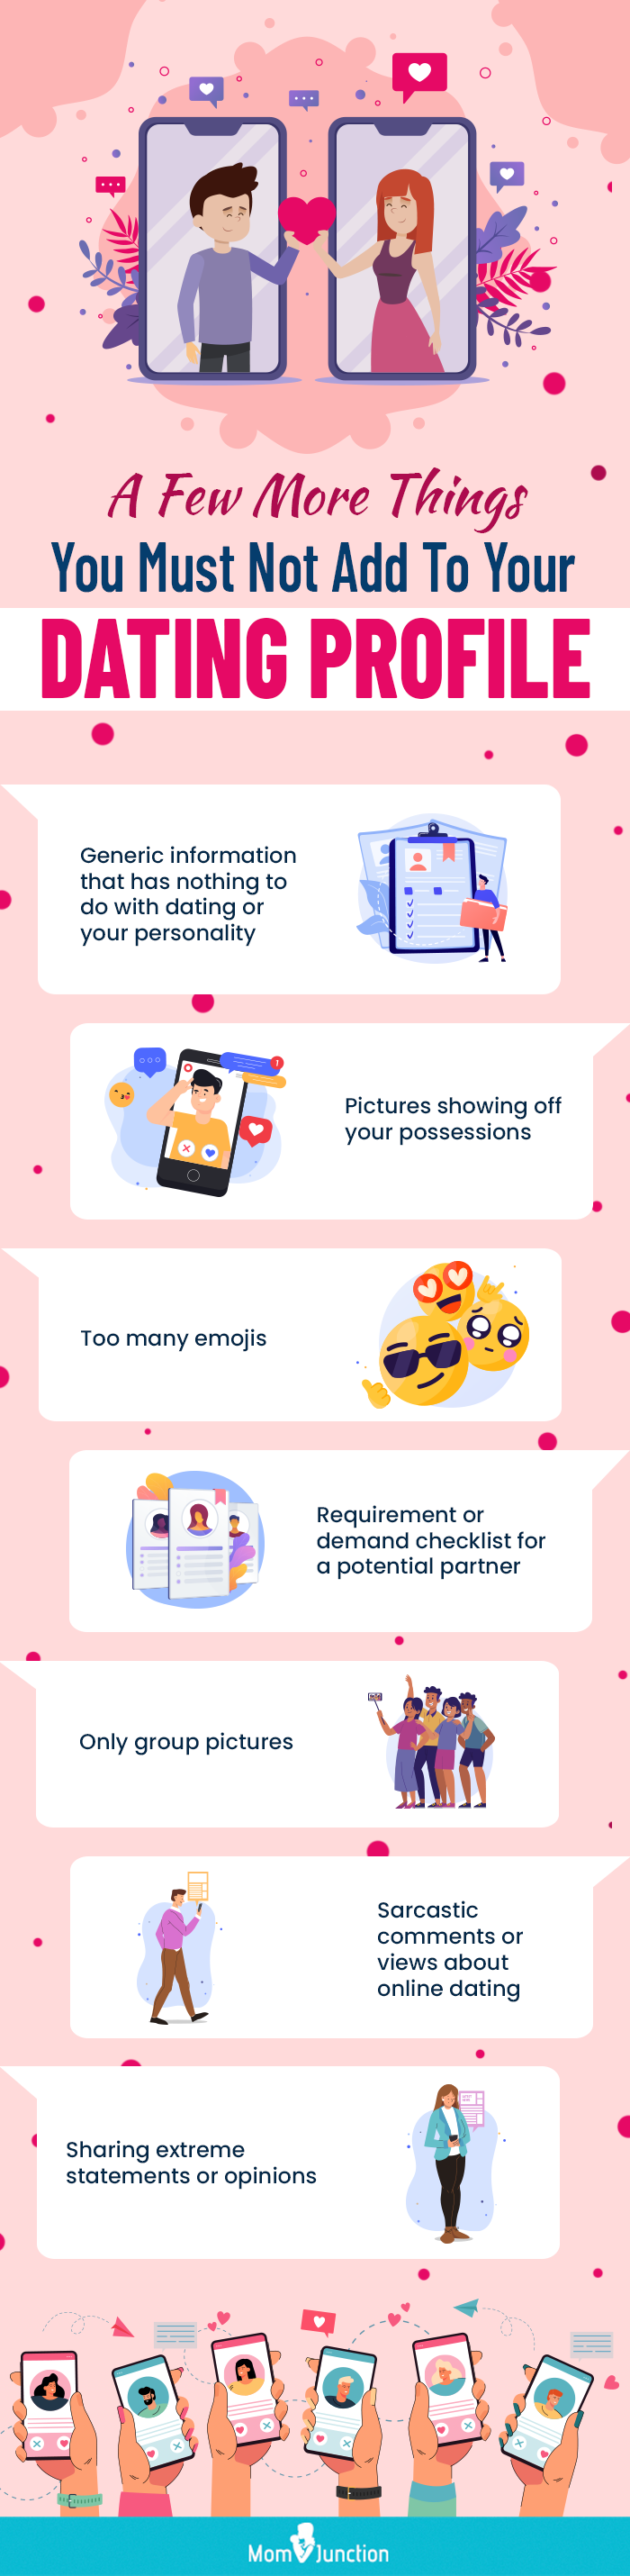 things you must not add to your dating profile (infographic)